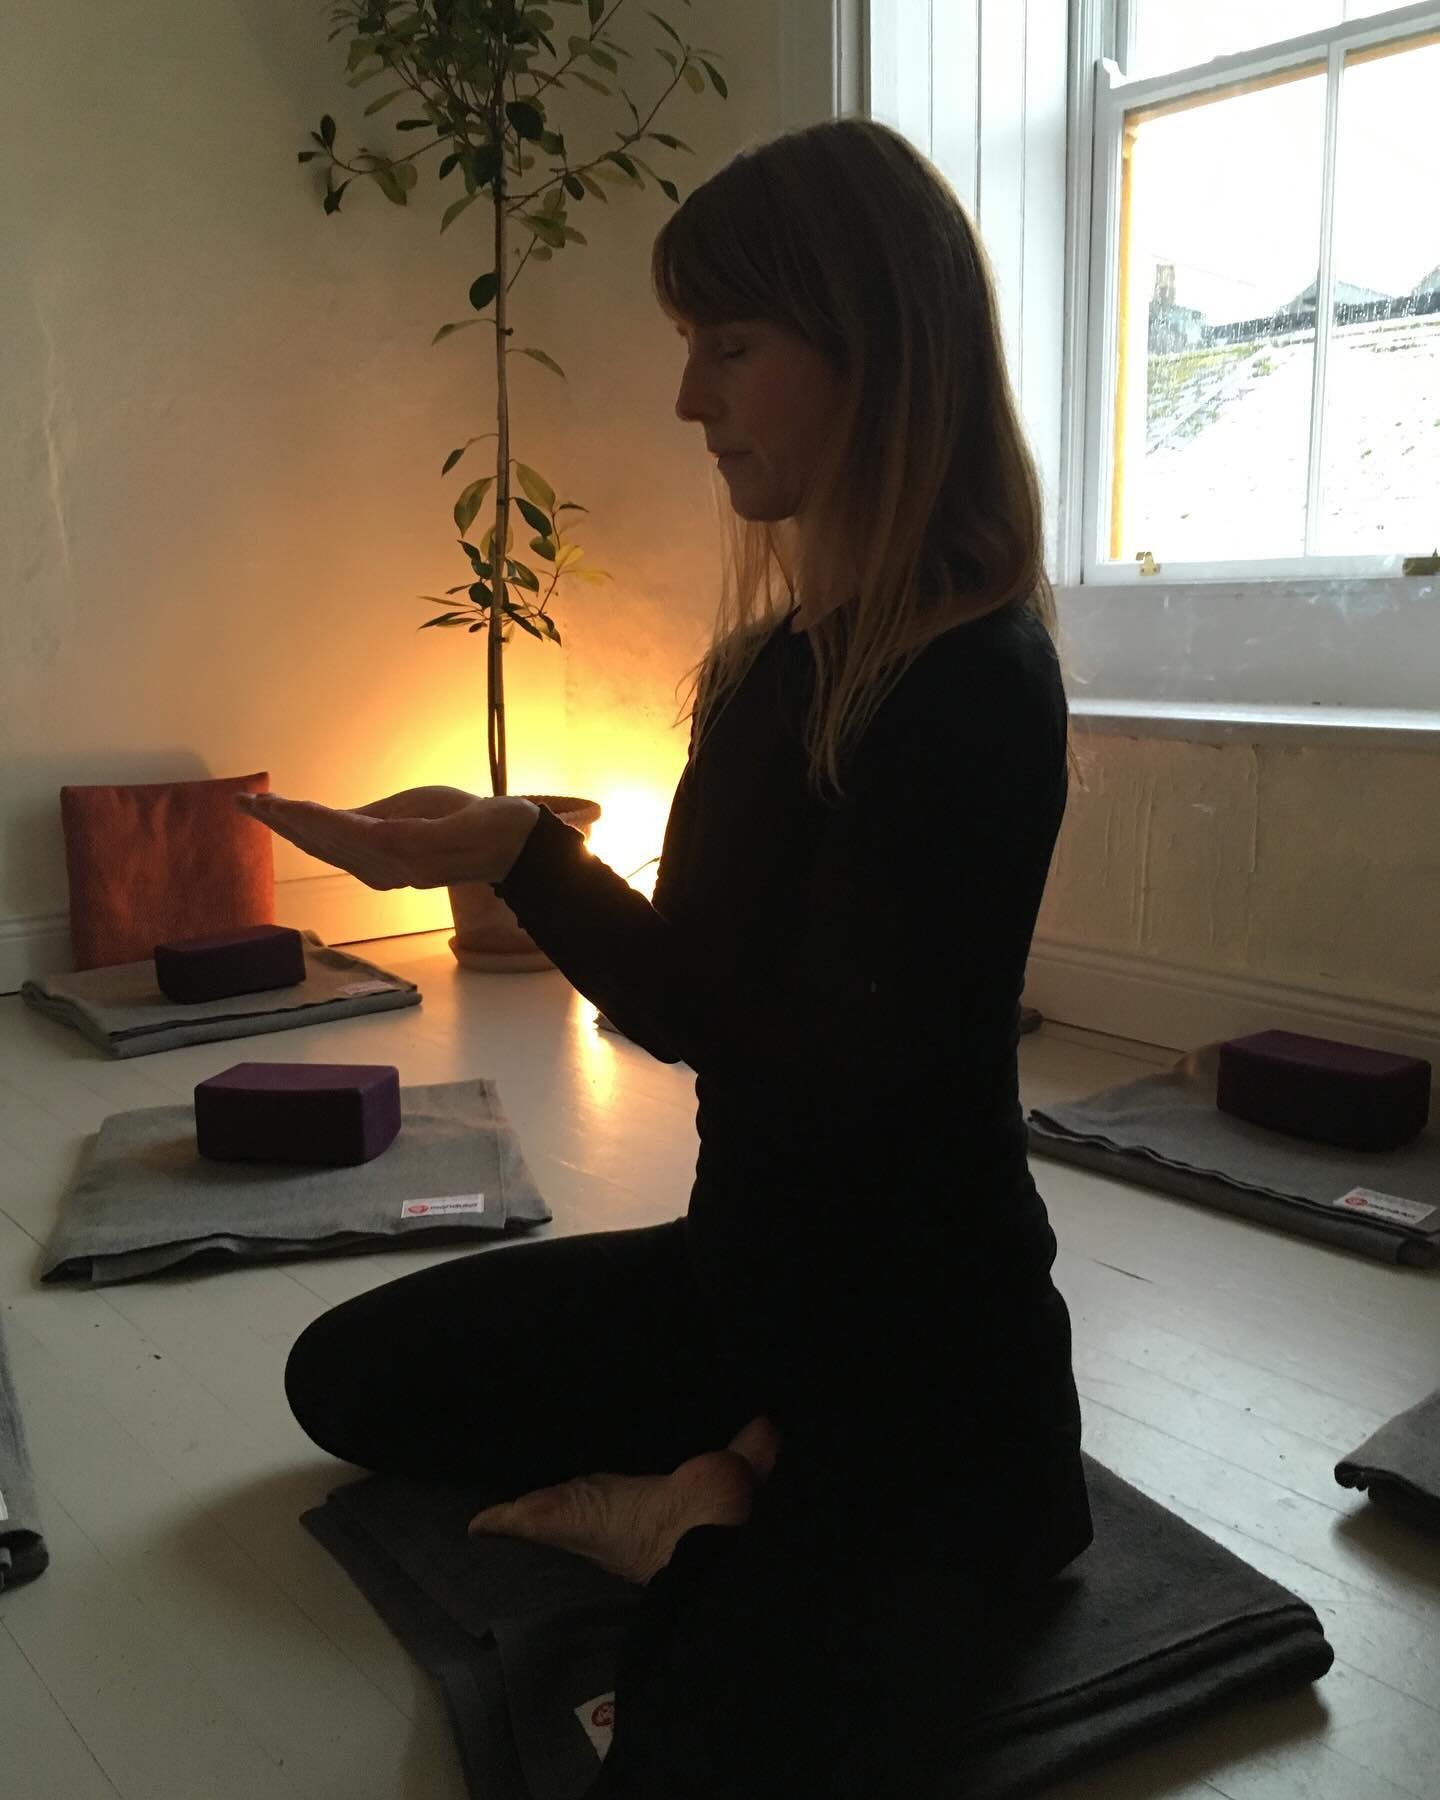 If you want to feel more open and clear, you definitely want to join Textures of Yoga on Saturday 4th May at 9am in Coffeewerk and Press, Quay St, Galway

Saturday morning&rsquo;s TEXTURES OF YOGA introduces the energy of inspiration and expression. 